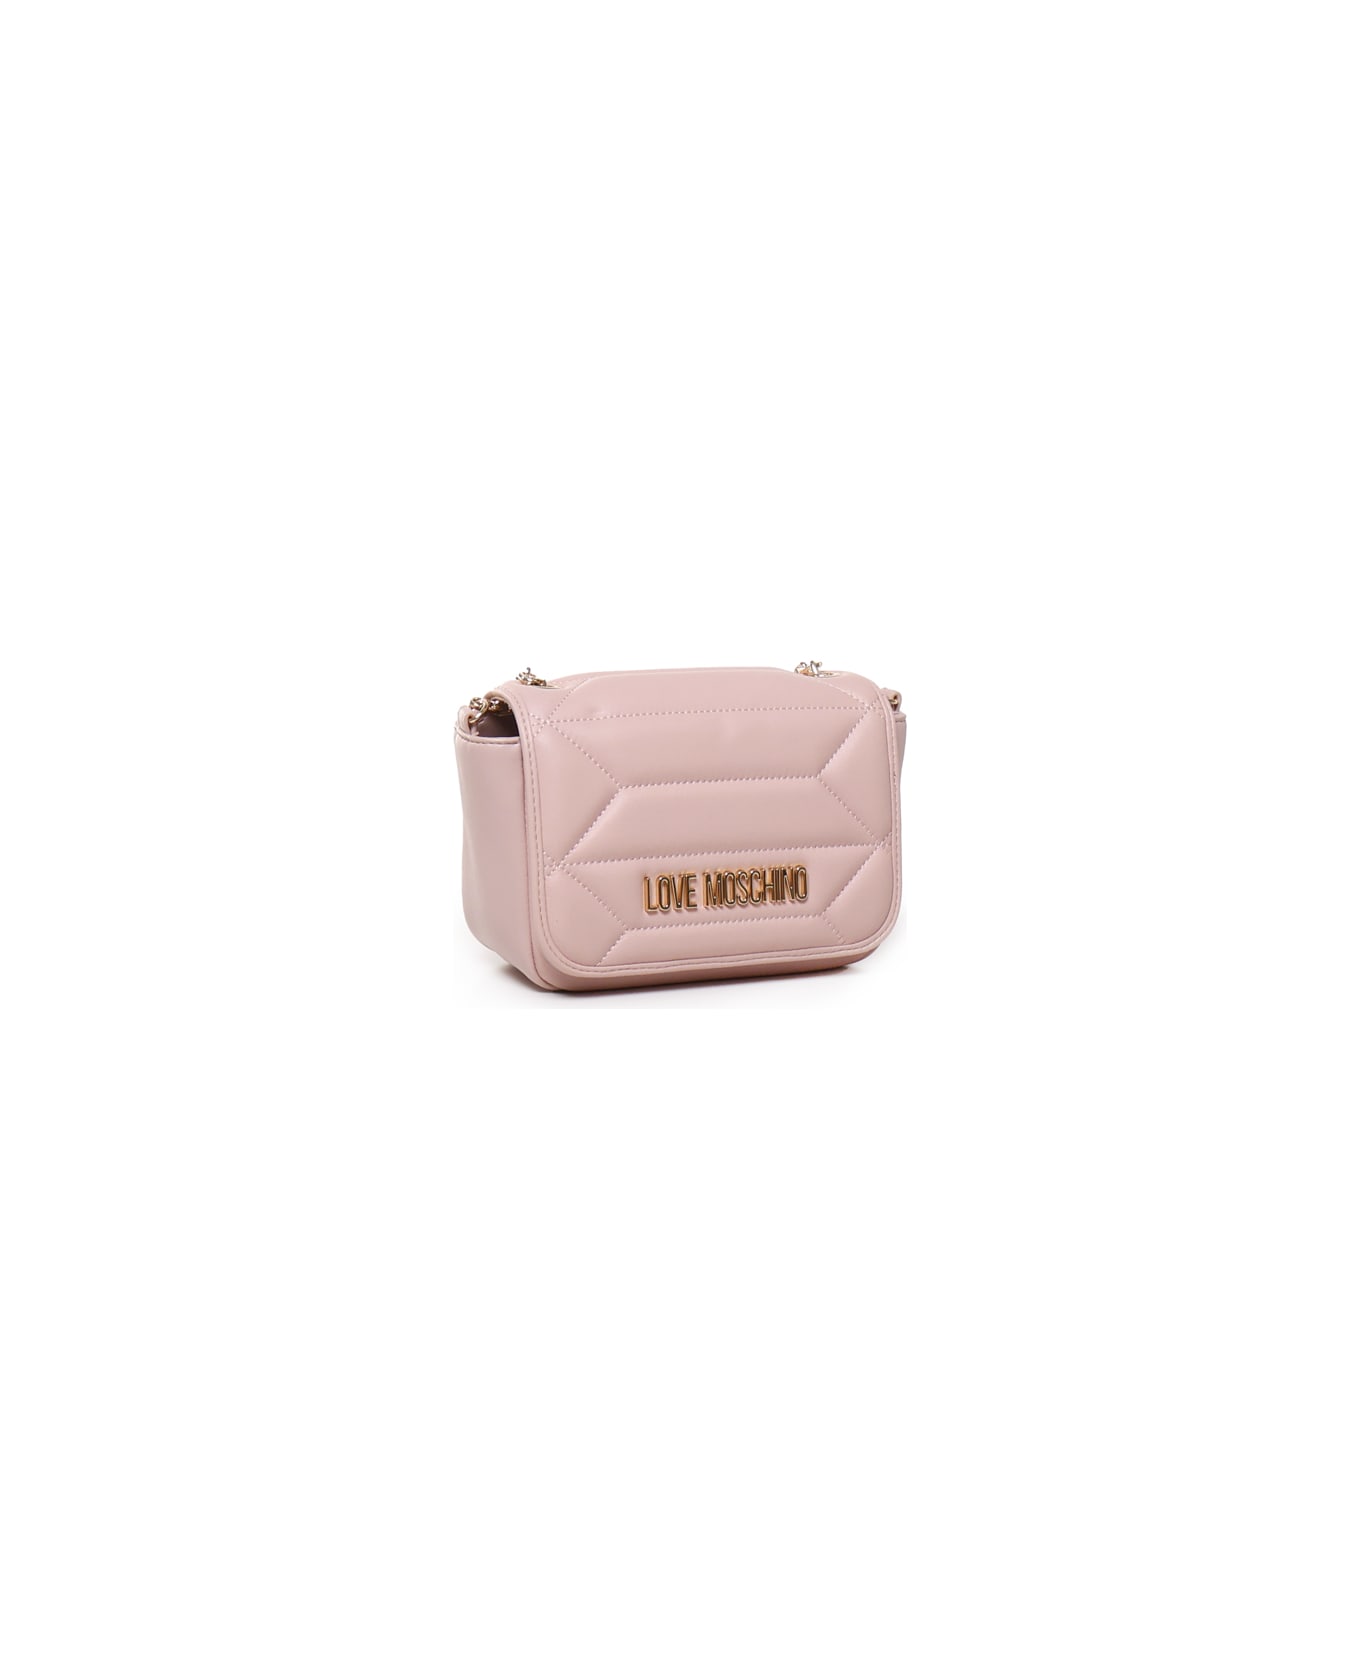 Love Moschino Shoulder Bag In Ecoleather - Powder pink